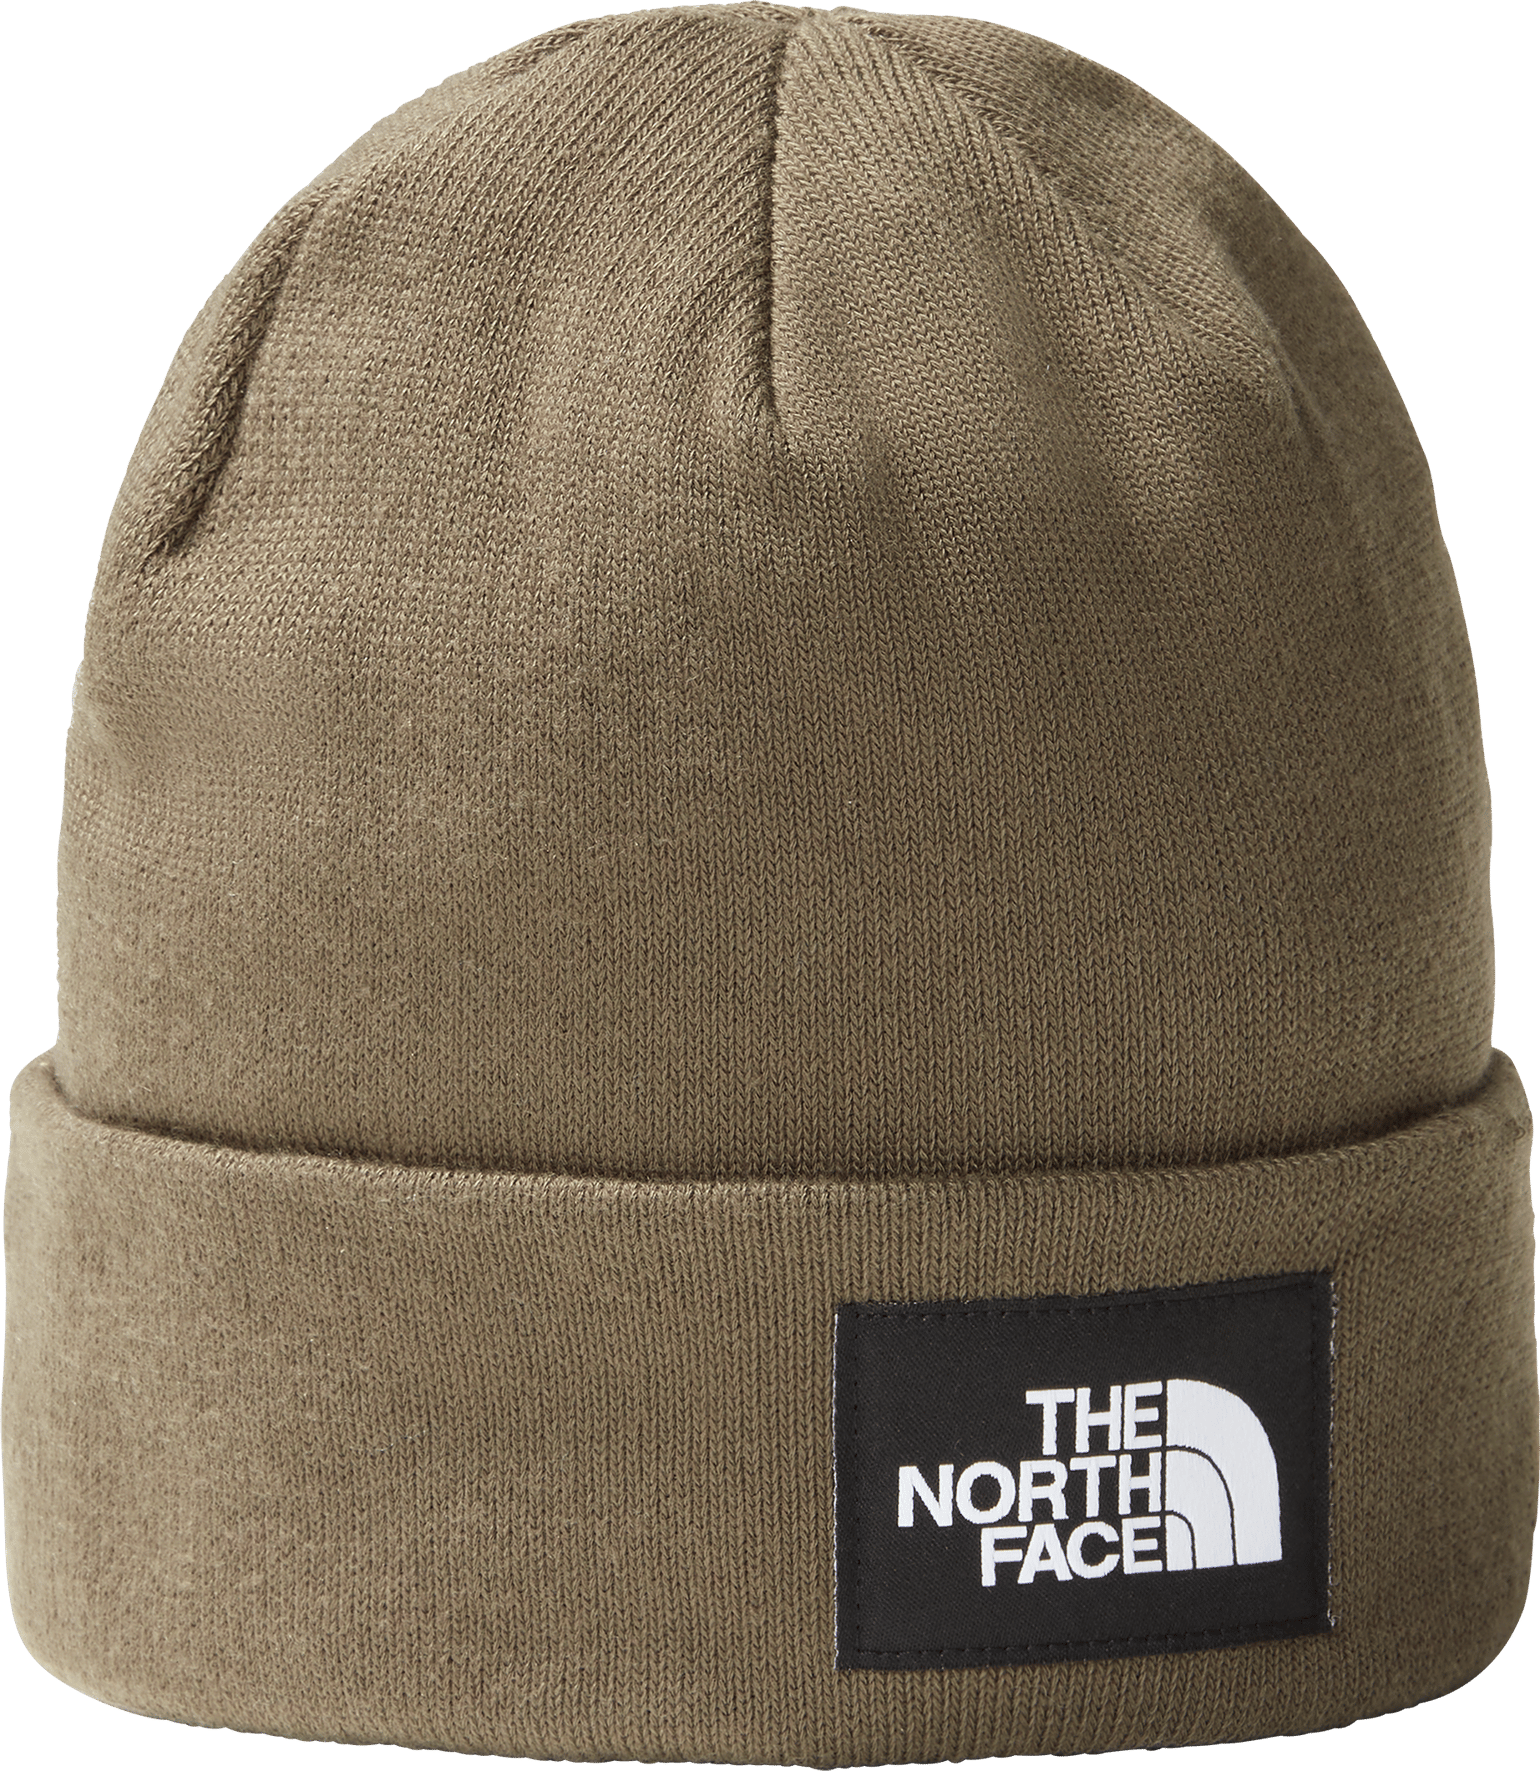 The North Face Dock Worker Recycled Beanie NEW TAUPE GREEN